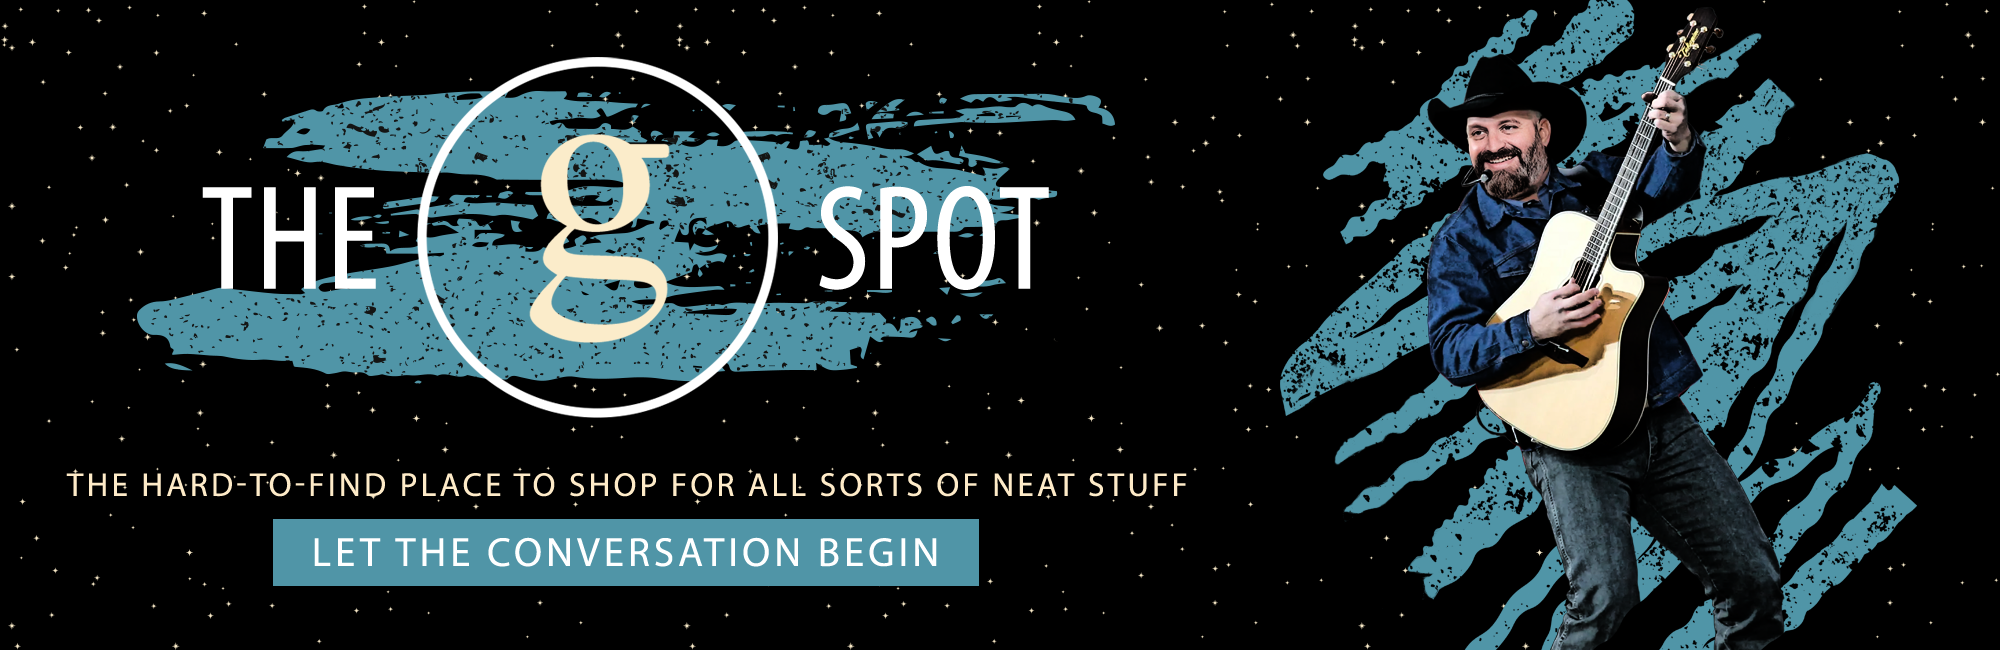 Homepage Banner - The G Spot